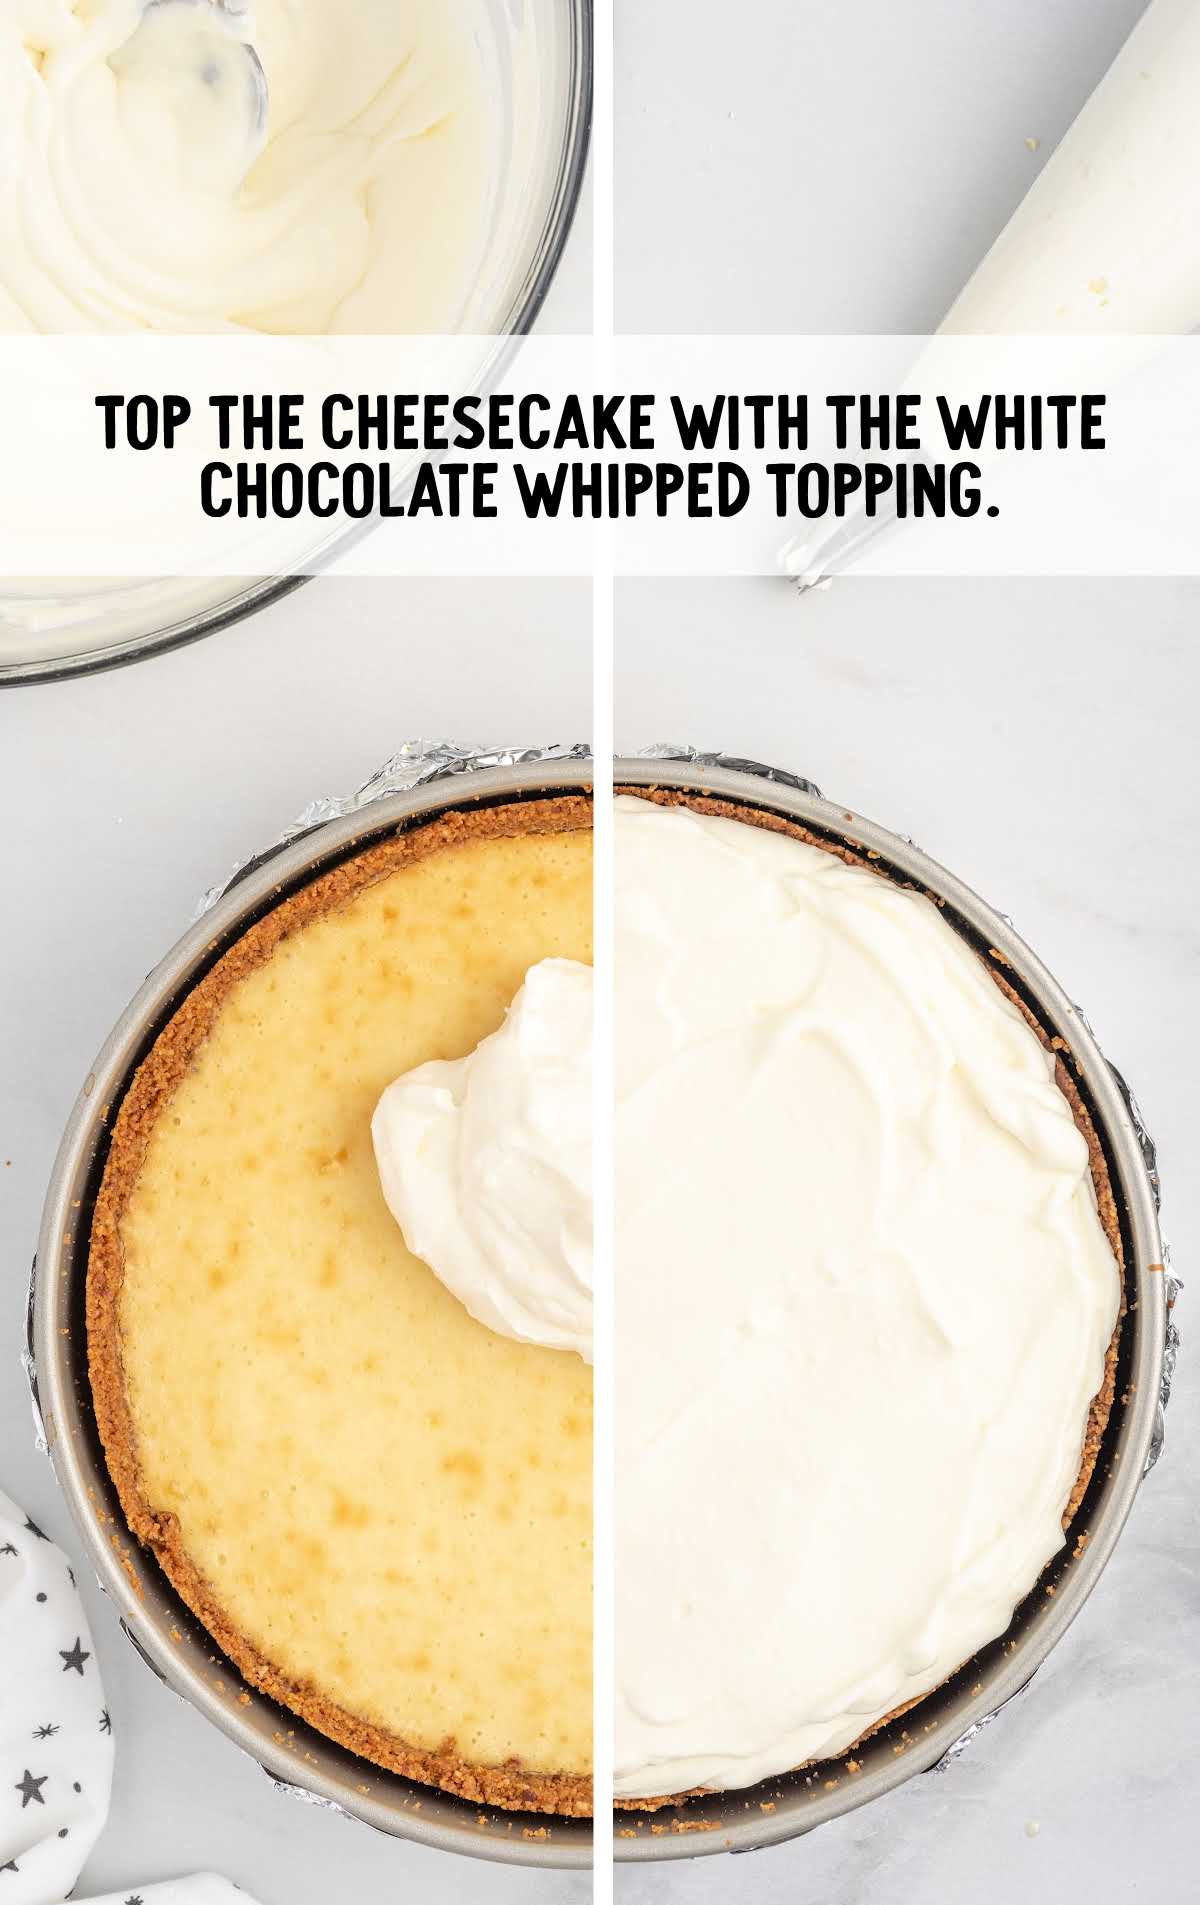 chocolate whipped topping topped on top of the cheesecake